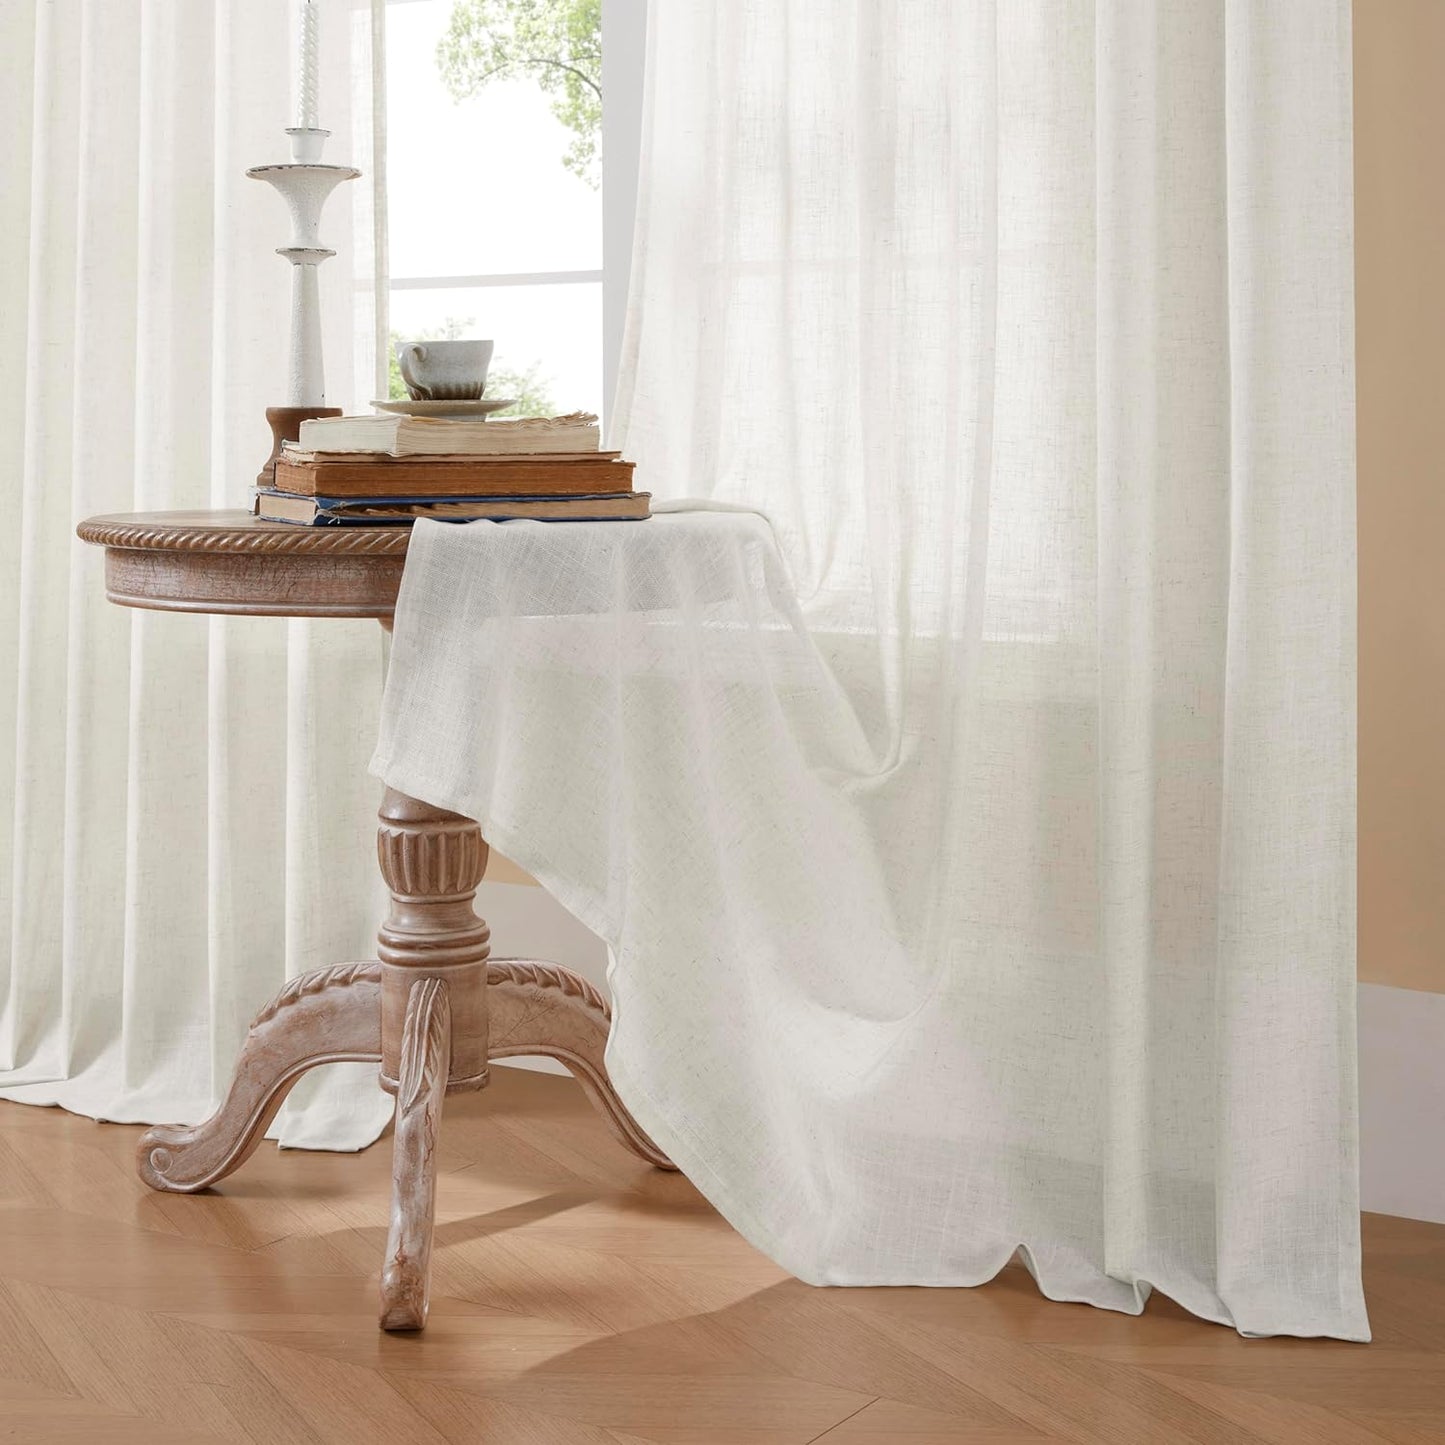 Joydeco Linen Curtains for Living Room,Semi-Sheer Curtains 108 Inches Long,Living Room Curtains 2 Panel Sets,White Curtains Pinch Pleated Curtains & Drapes(W52 X L108 Inch, Off-White)  Joydeco   